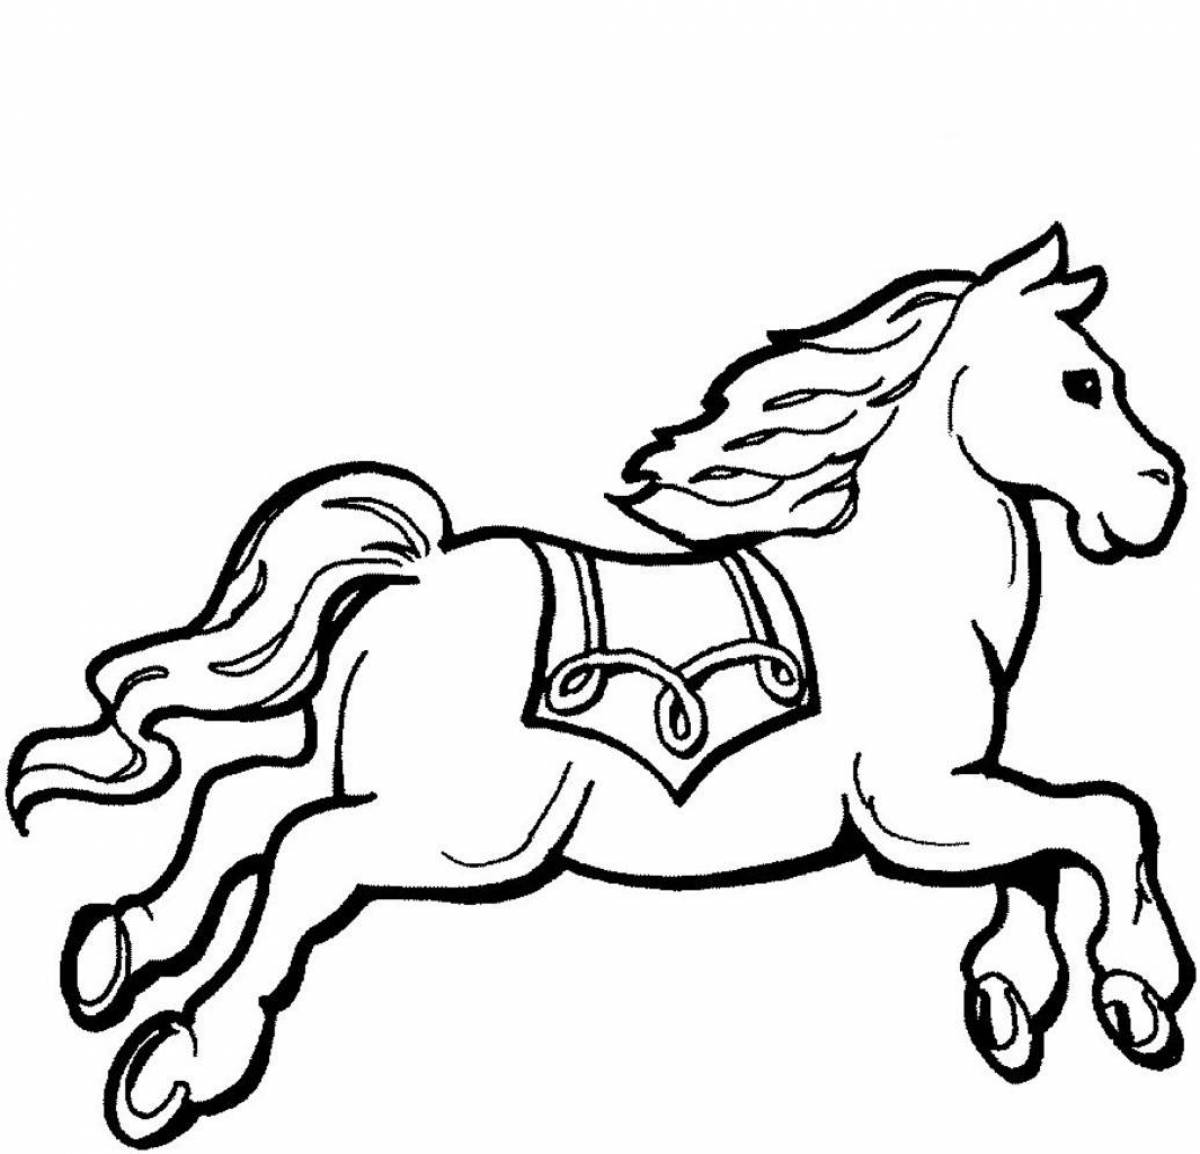 Violent horse coloring pages for girls